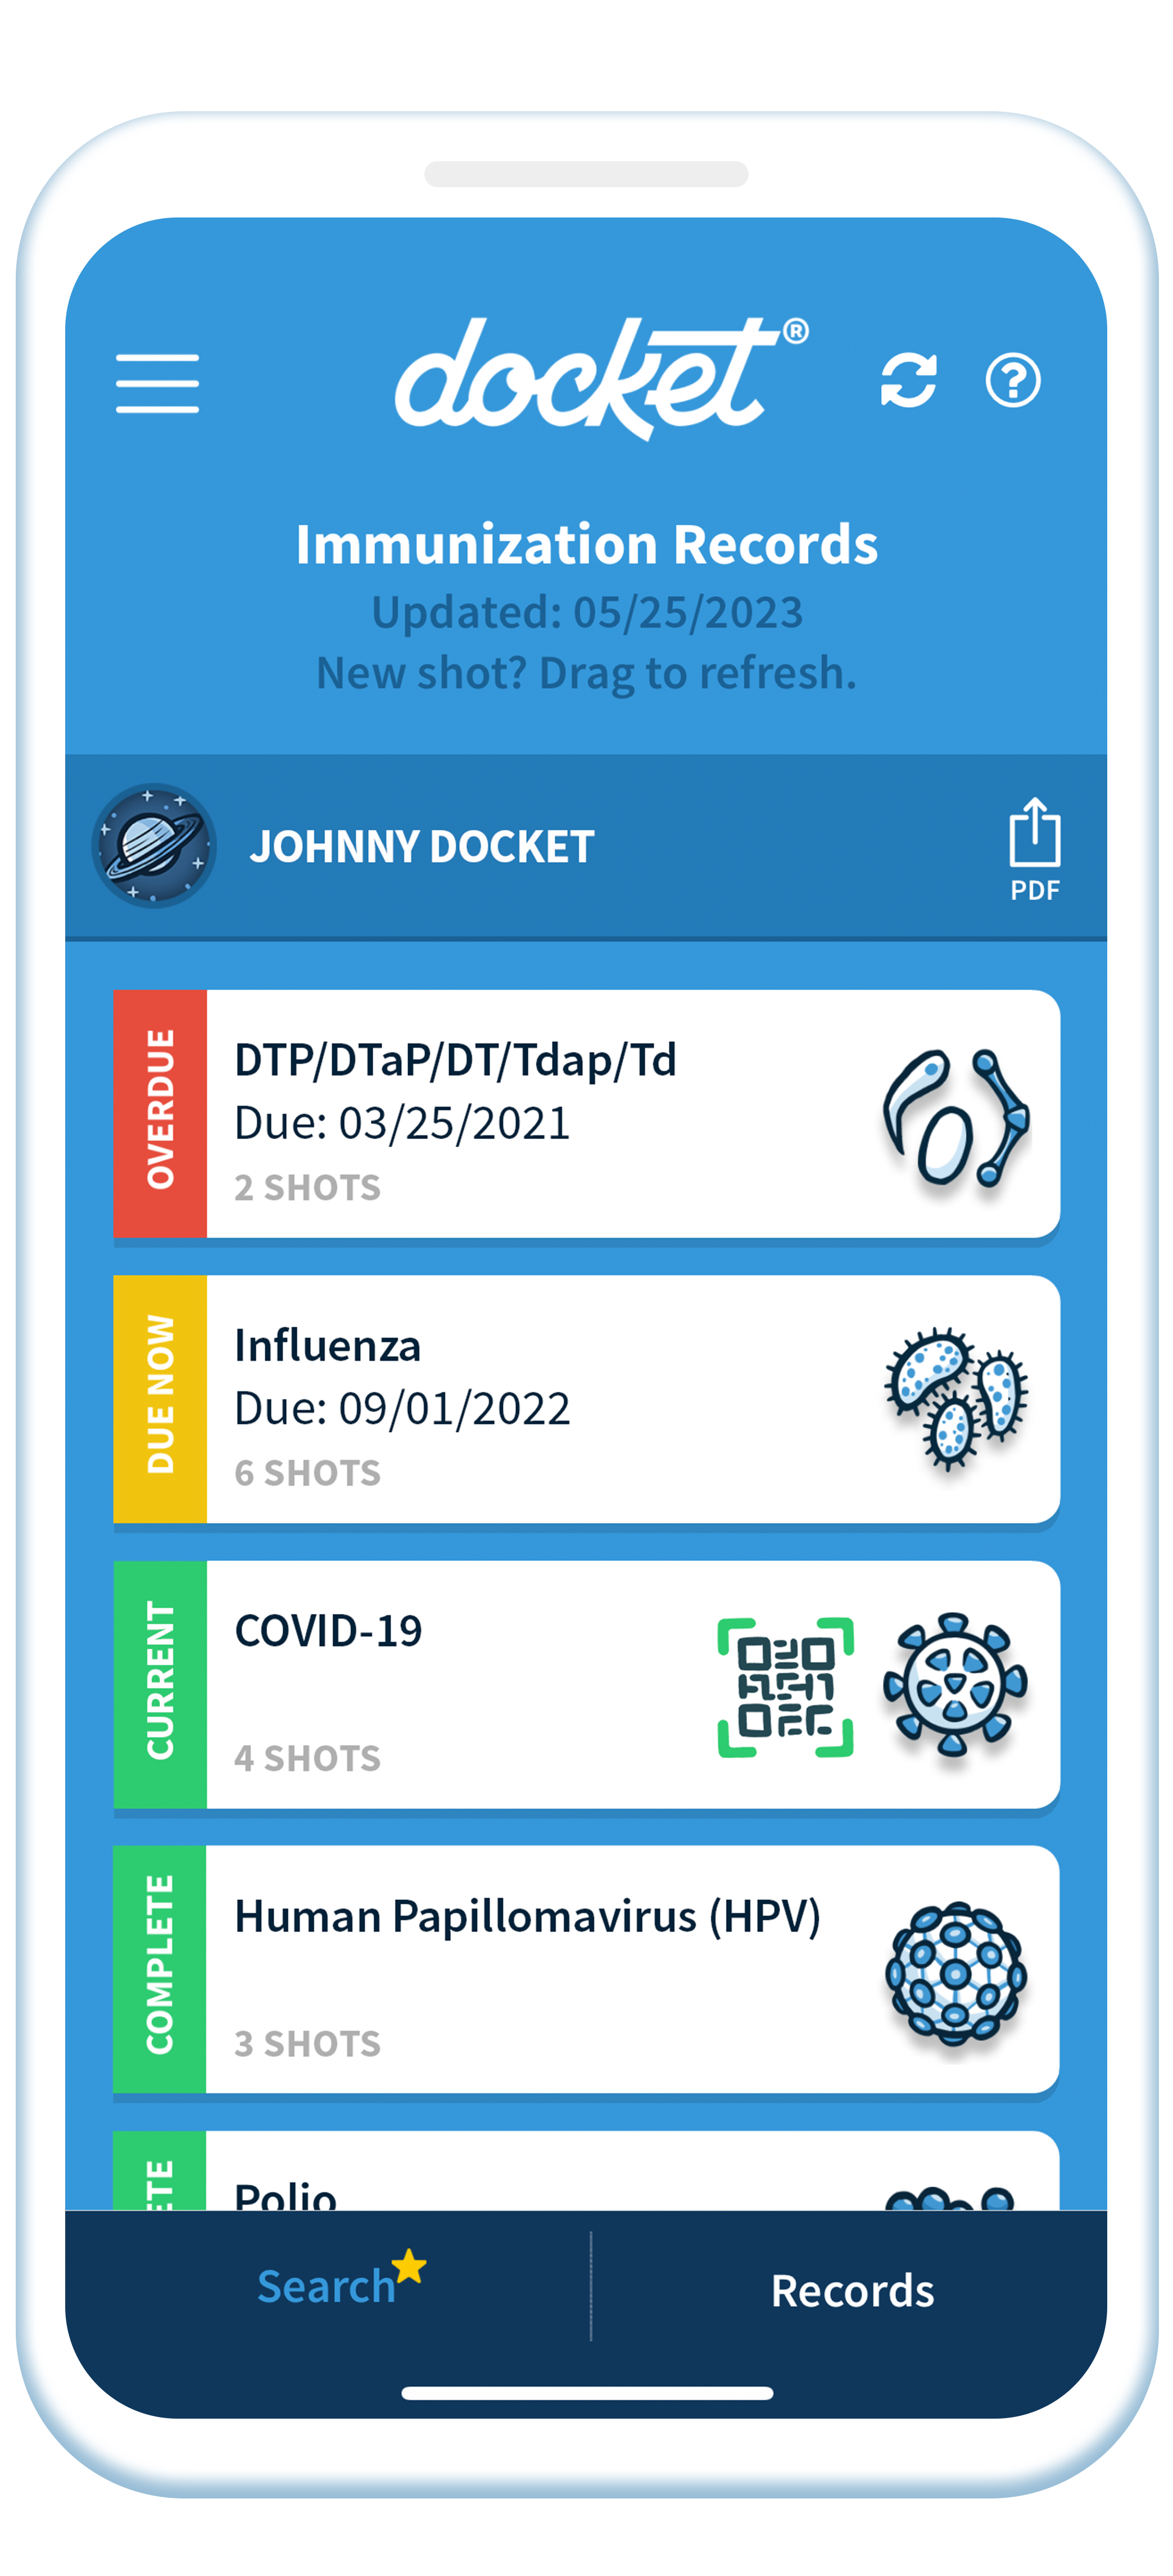 Image of a cell phone screen with Docket application showing vaccine record.